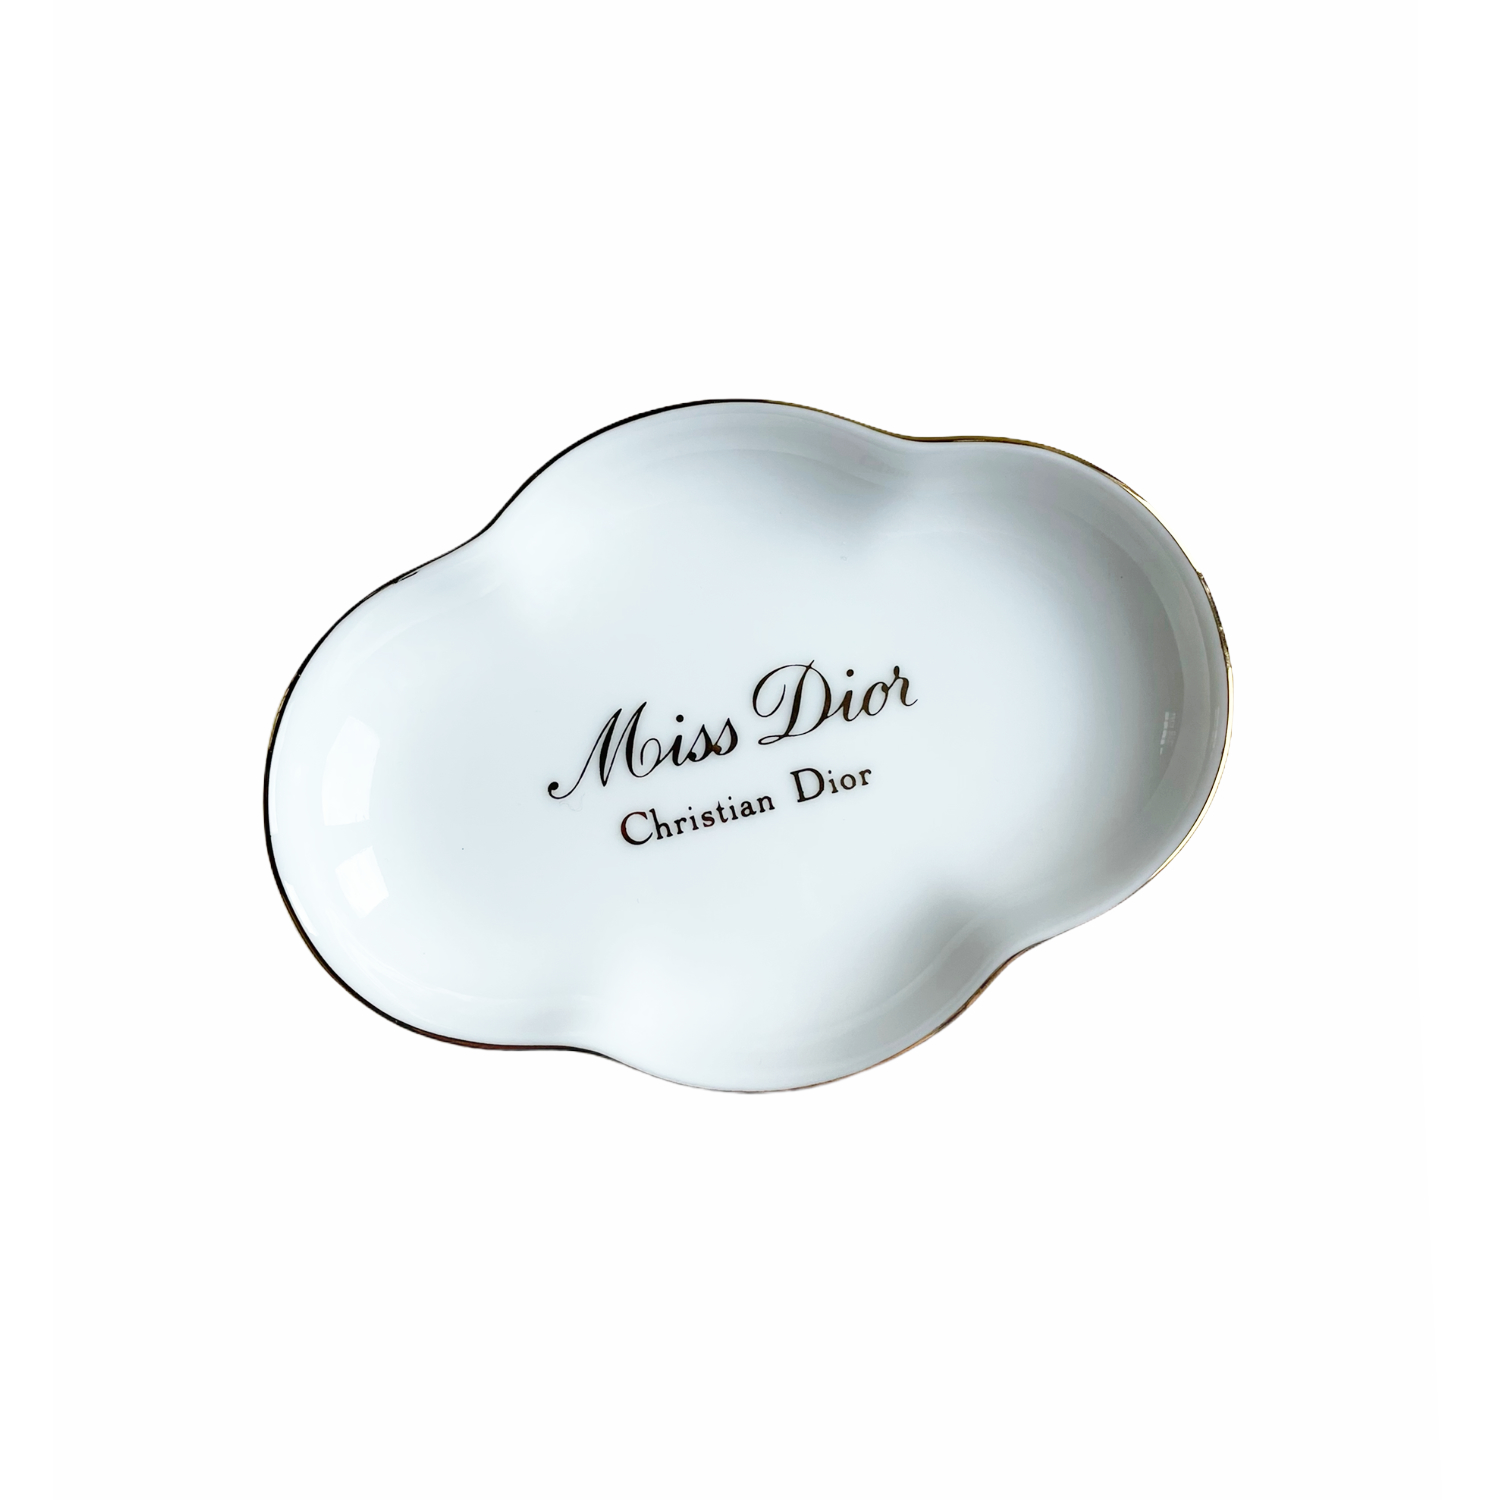 Vintage Dior 'Miss Dior' Porcelain Mini Dish/Tray in White and Gold | NITRYL